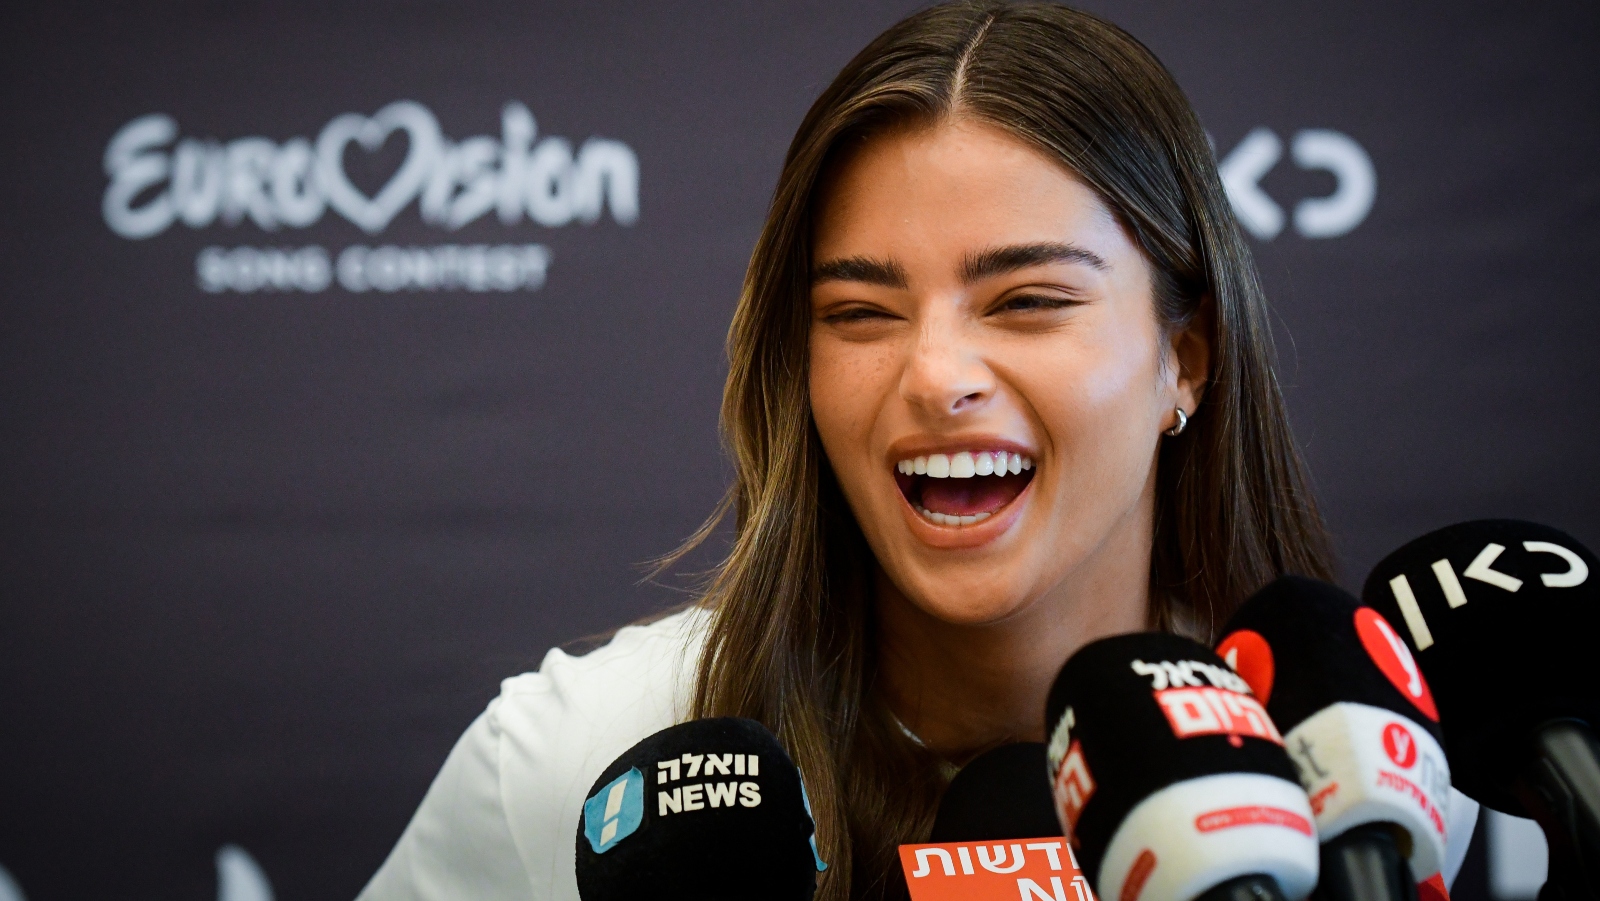 Israeli singer Noa Kirel at a press conference in Tel Aviv on August 10, 2022, announcing her as Israel’s contestant in the 2023 Eurovision Song Contest. Photo by Avshalom Sassoni/Flash90